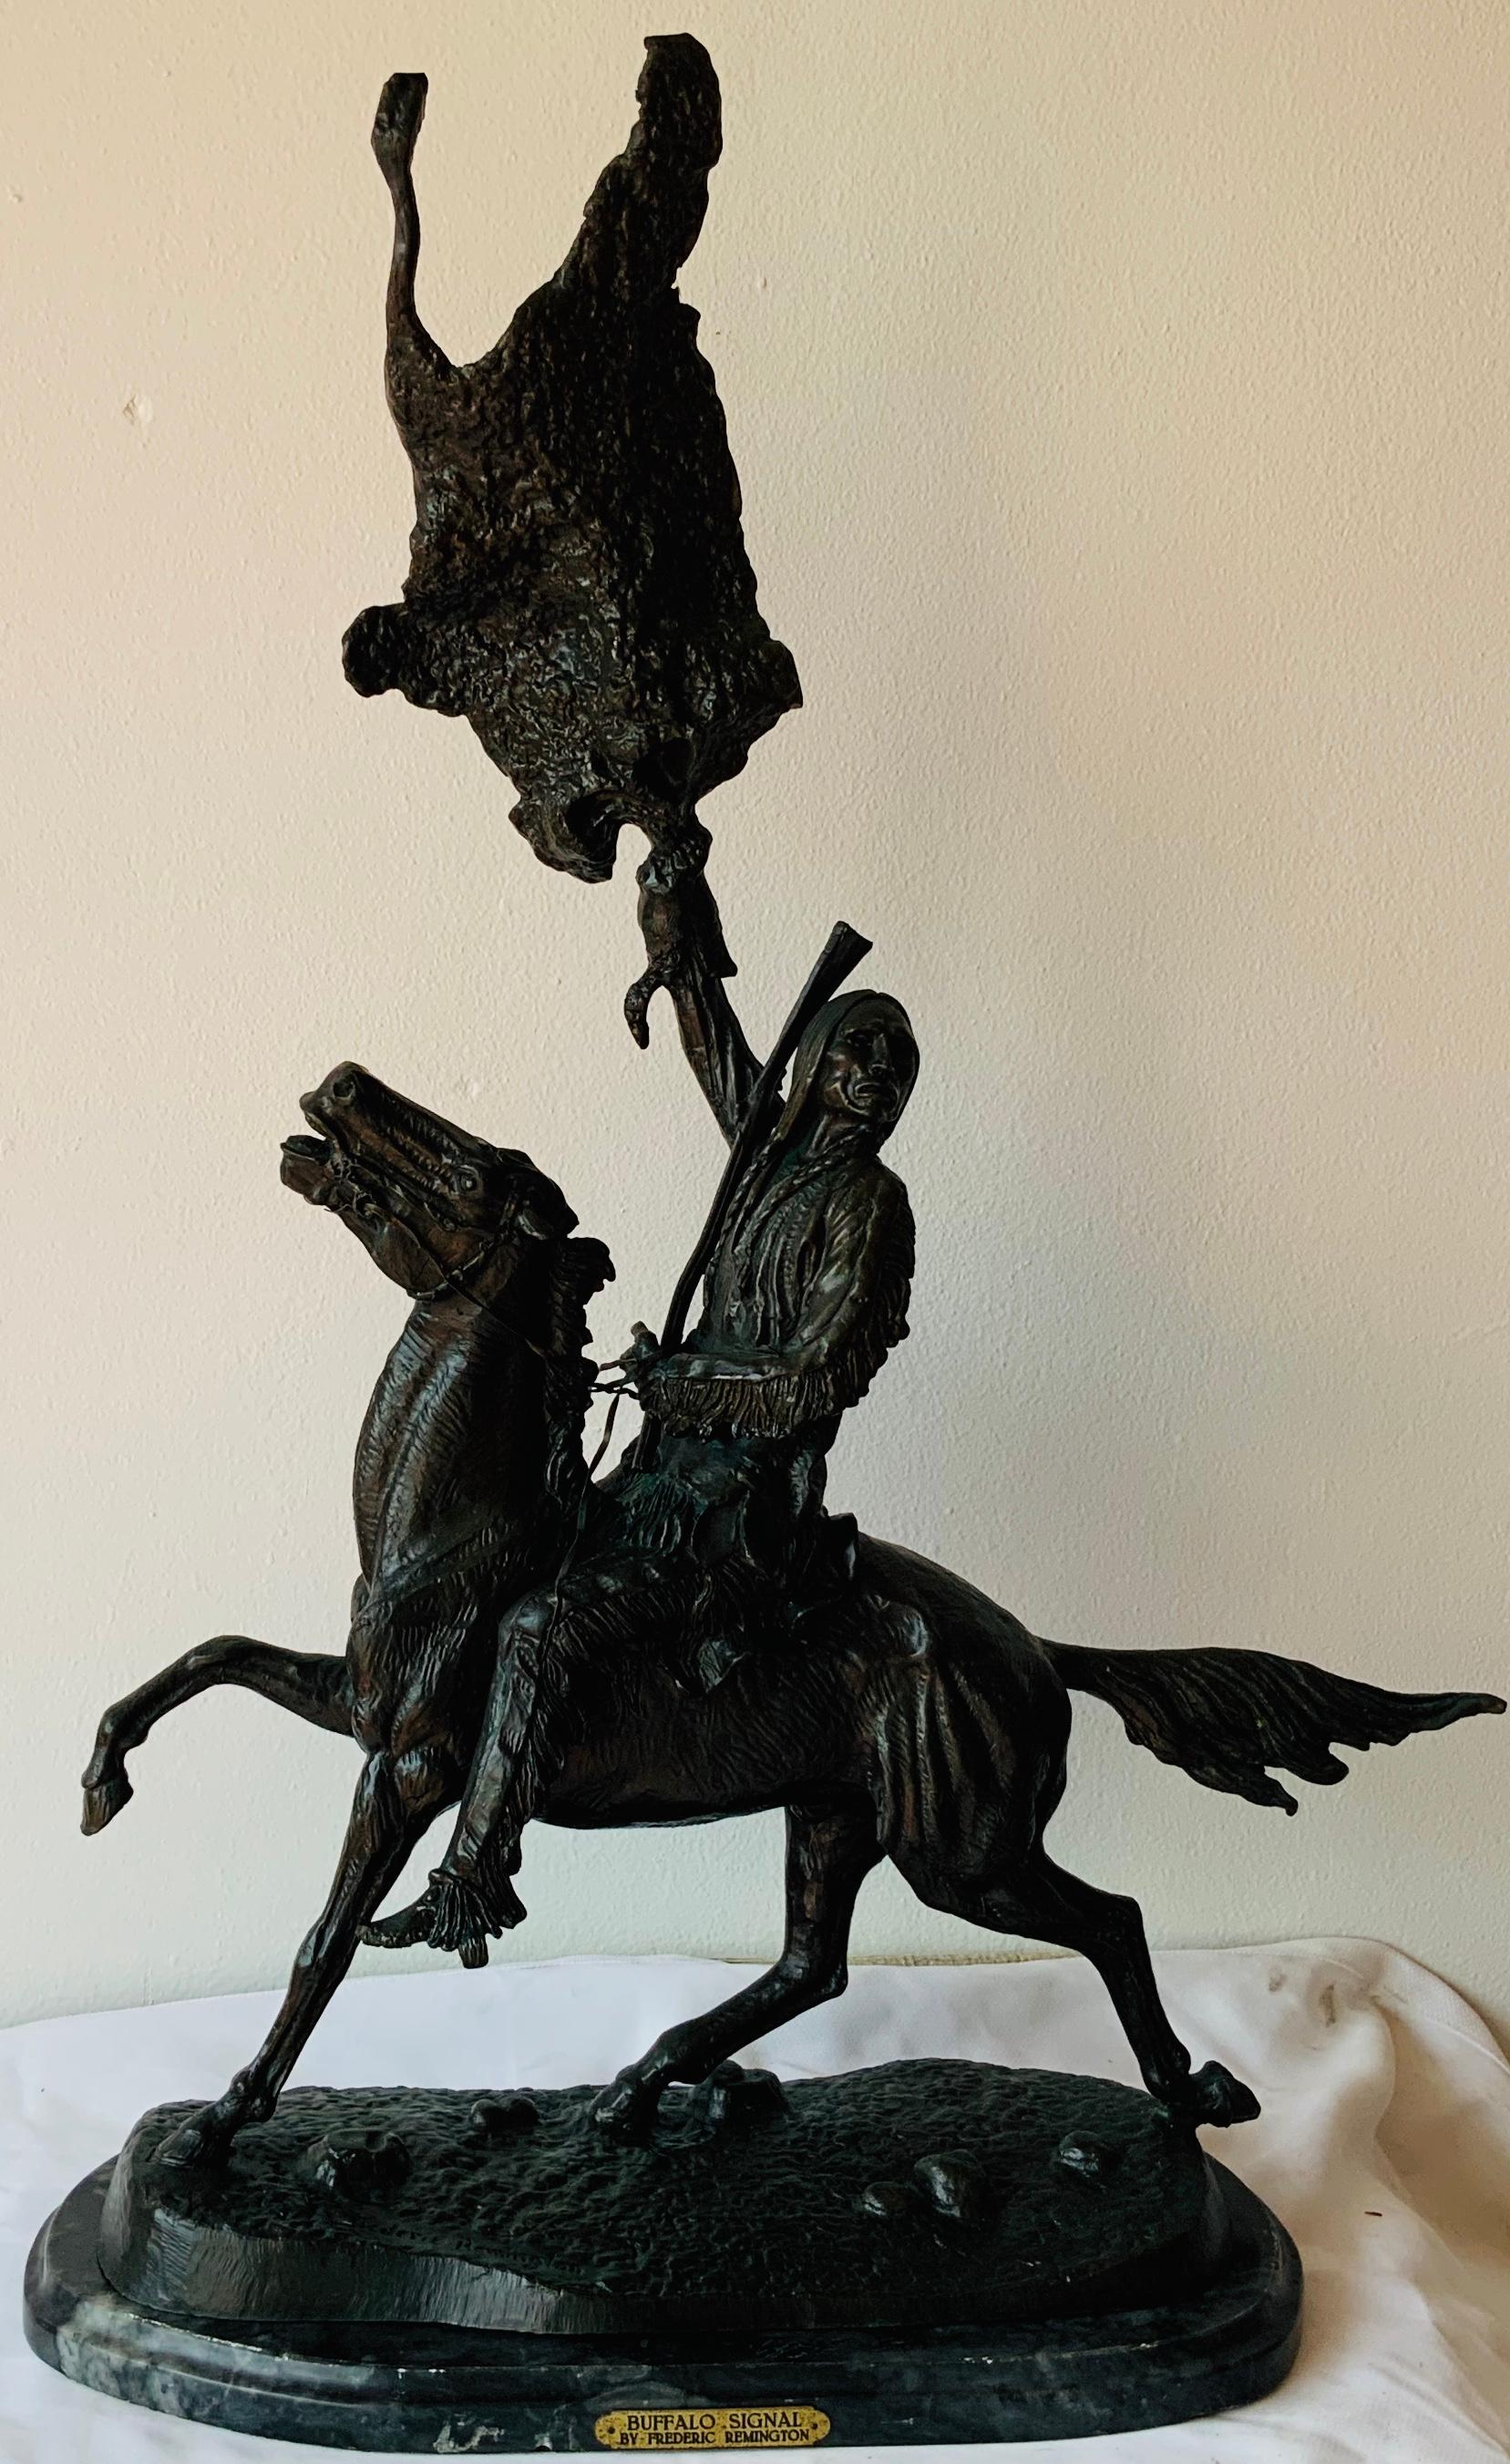 This is a very heavy sculpture of a victorious Native American man riding his horse with one hand while lifting up the slain buffalo with the other hand after successfully achieving the hunting of this animal. The horse is raising his right leg and